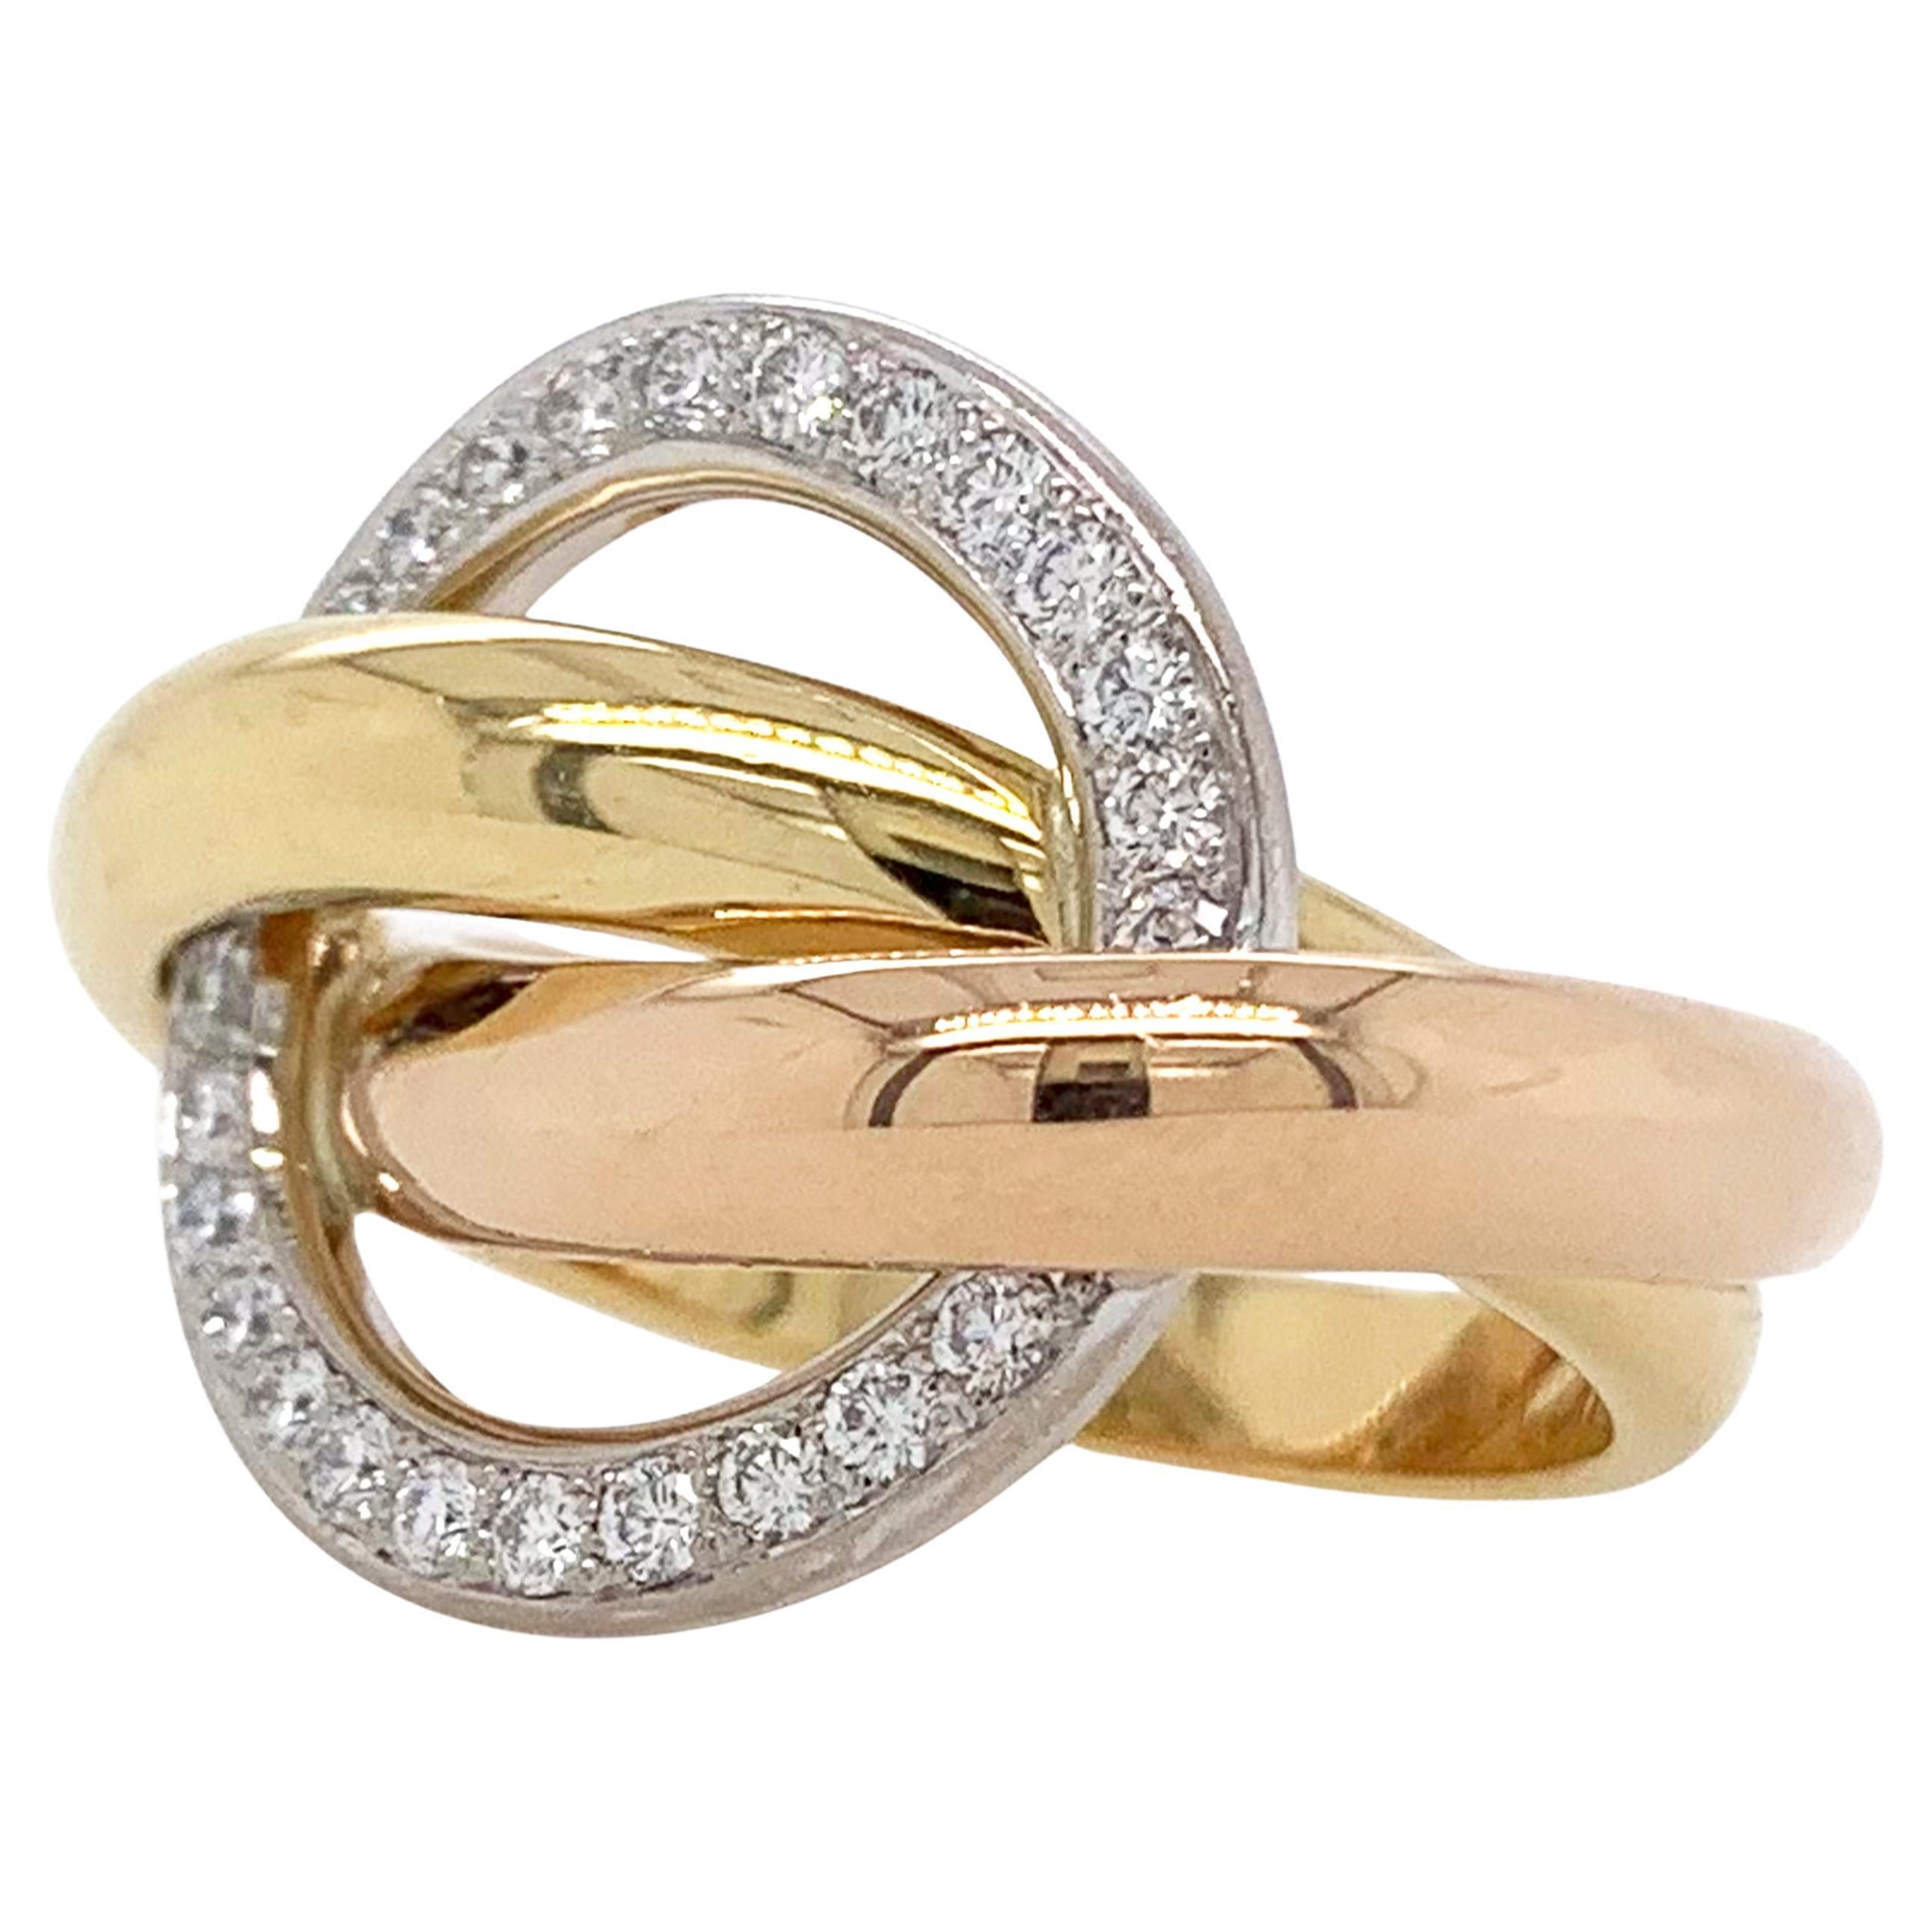 Cartier Trinity Crash diamond ring in 18k-tri gold.

This ring features a halo of 24 round brilliant cut diamonds totaling approximately 0.48 carat with E-F color and VS clarity set in 18k white gold.  The halo is supported by two intertwining bands